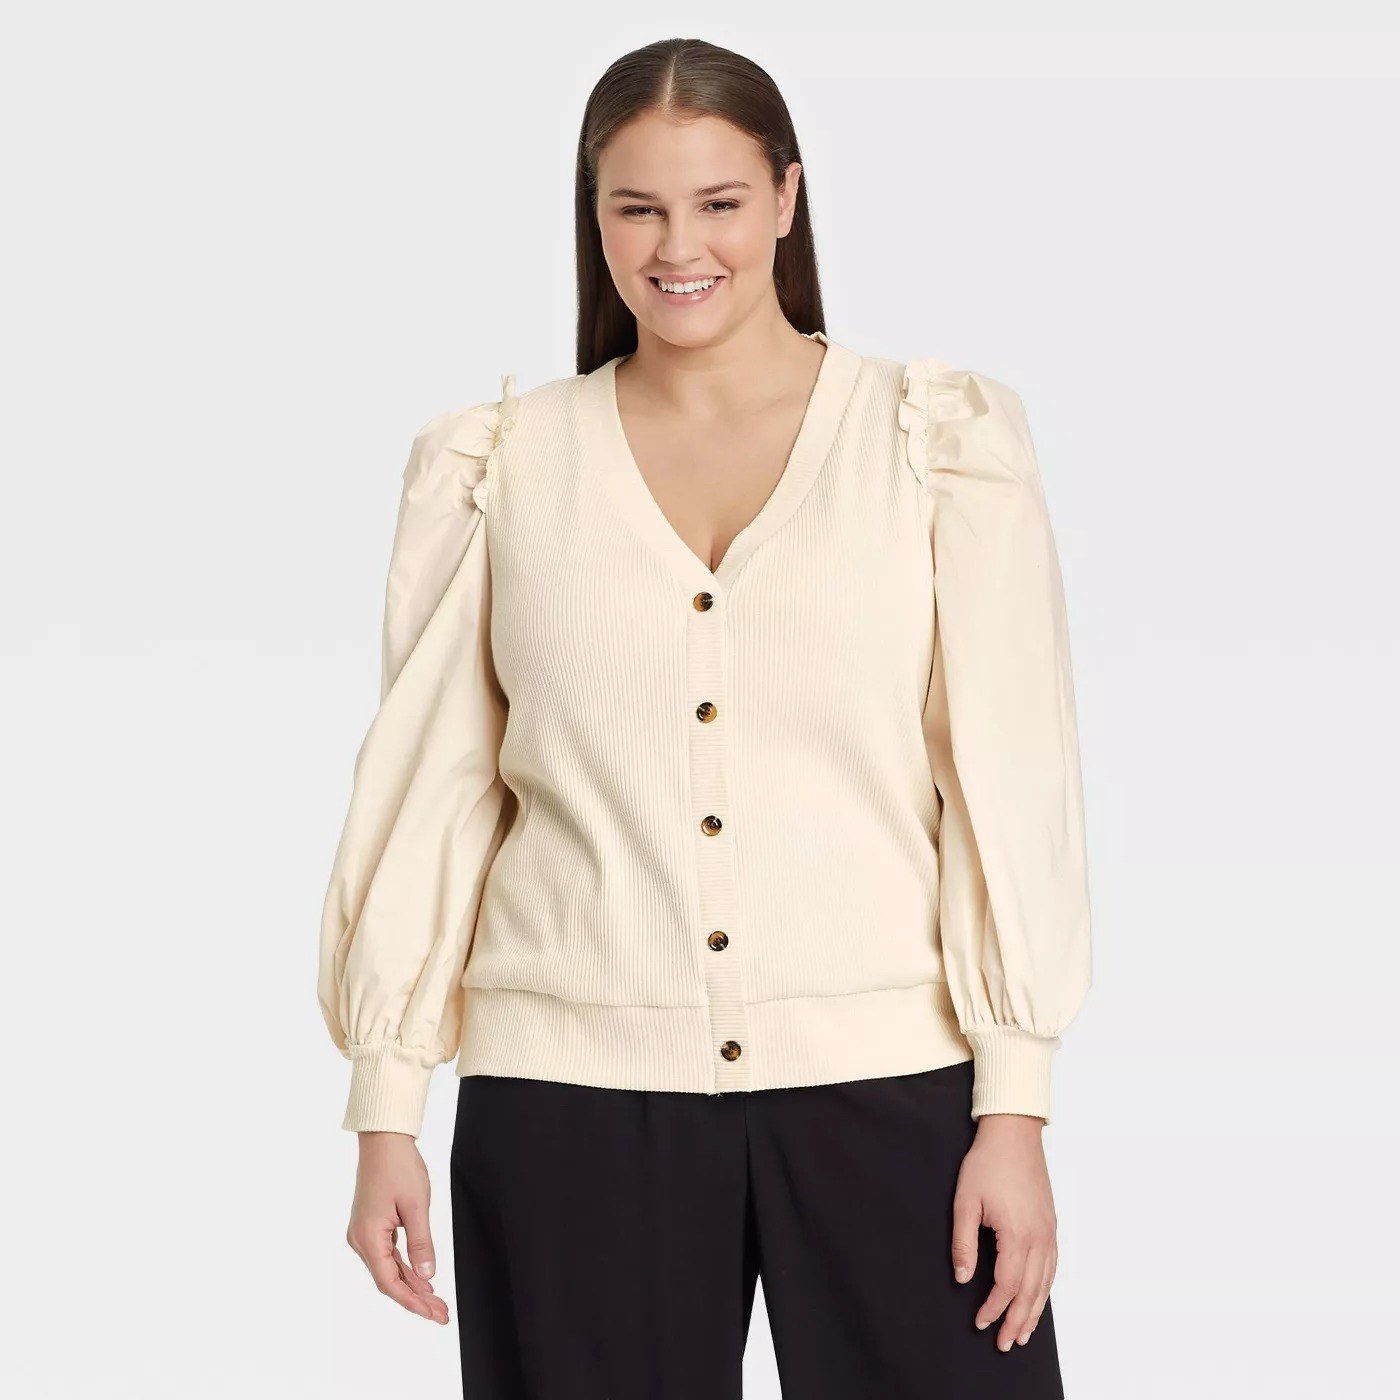 Model wearing cream colored cardigan with brown buttons